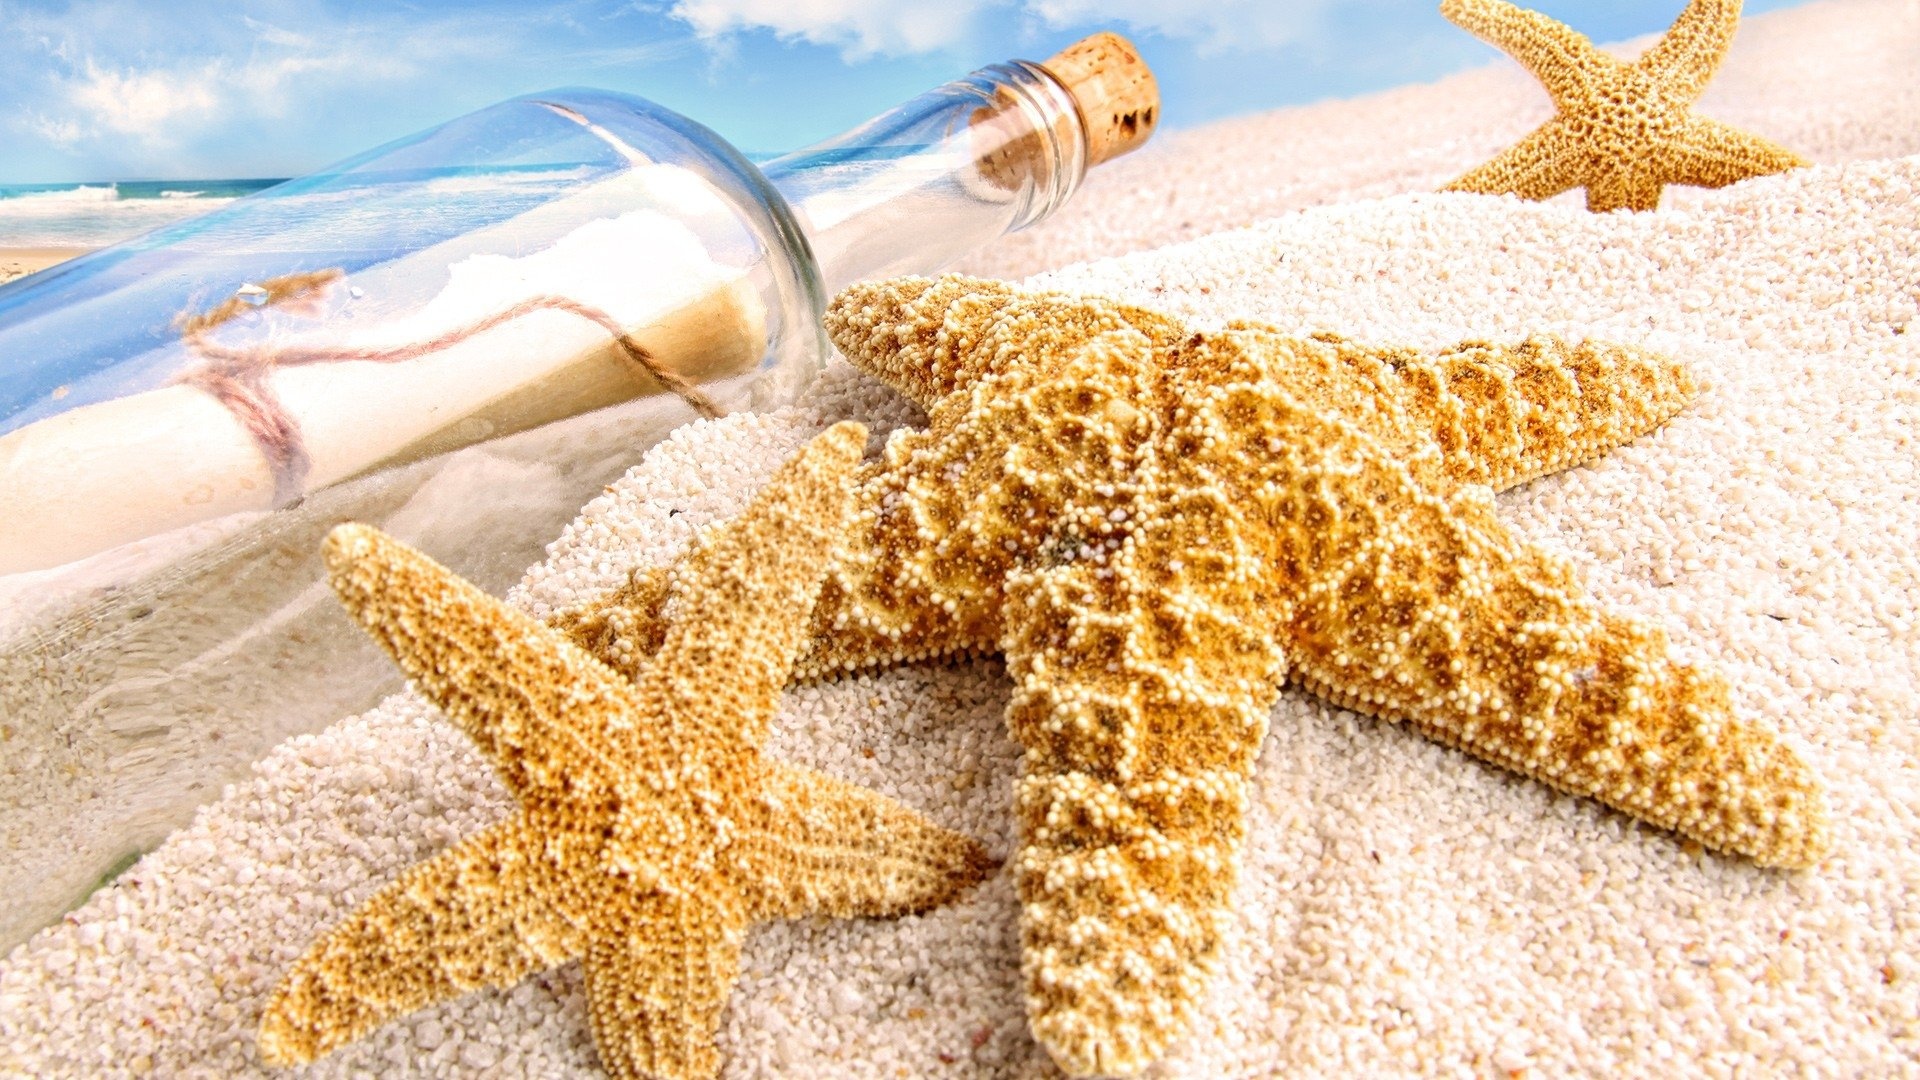 Sea Star: Message bottle, Average lifespan of species is 35 years. 1920x1080 Full HD Background.